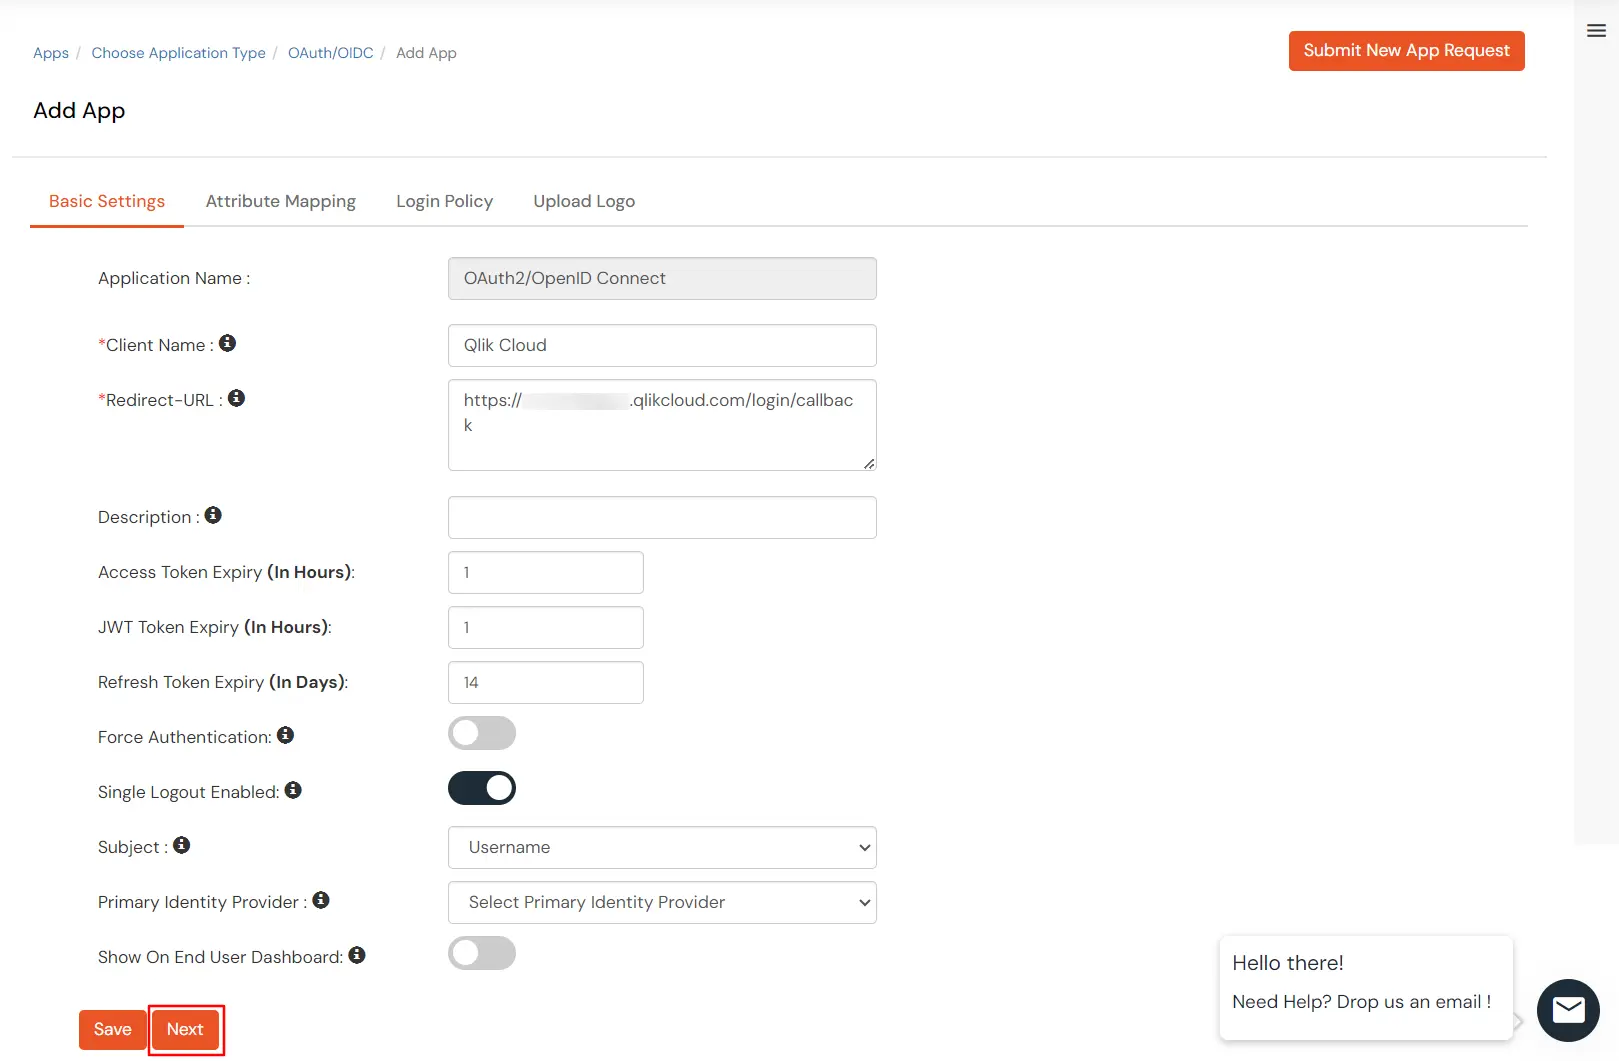 Qlik Cloud Single Sign-On (SSO) - Basic Settings, enter client name and redirect url 